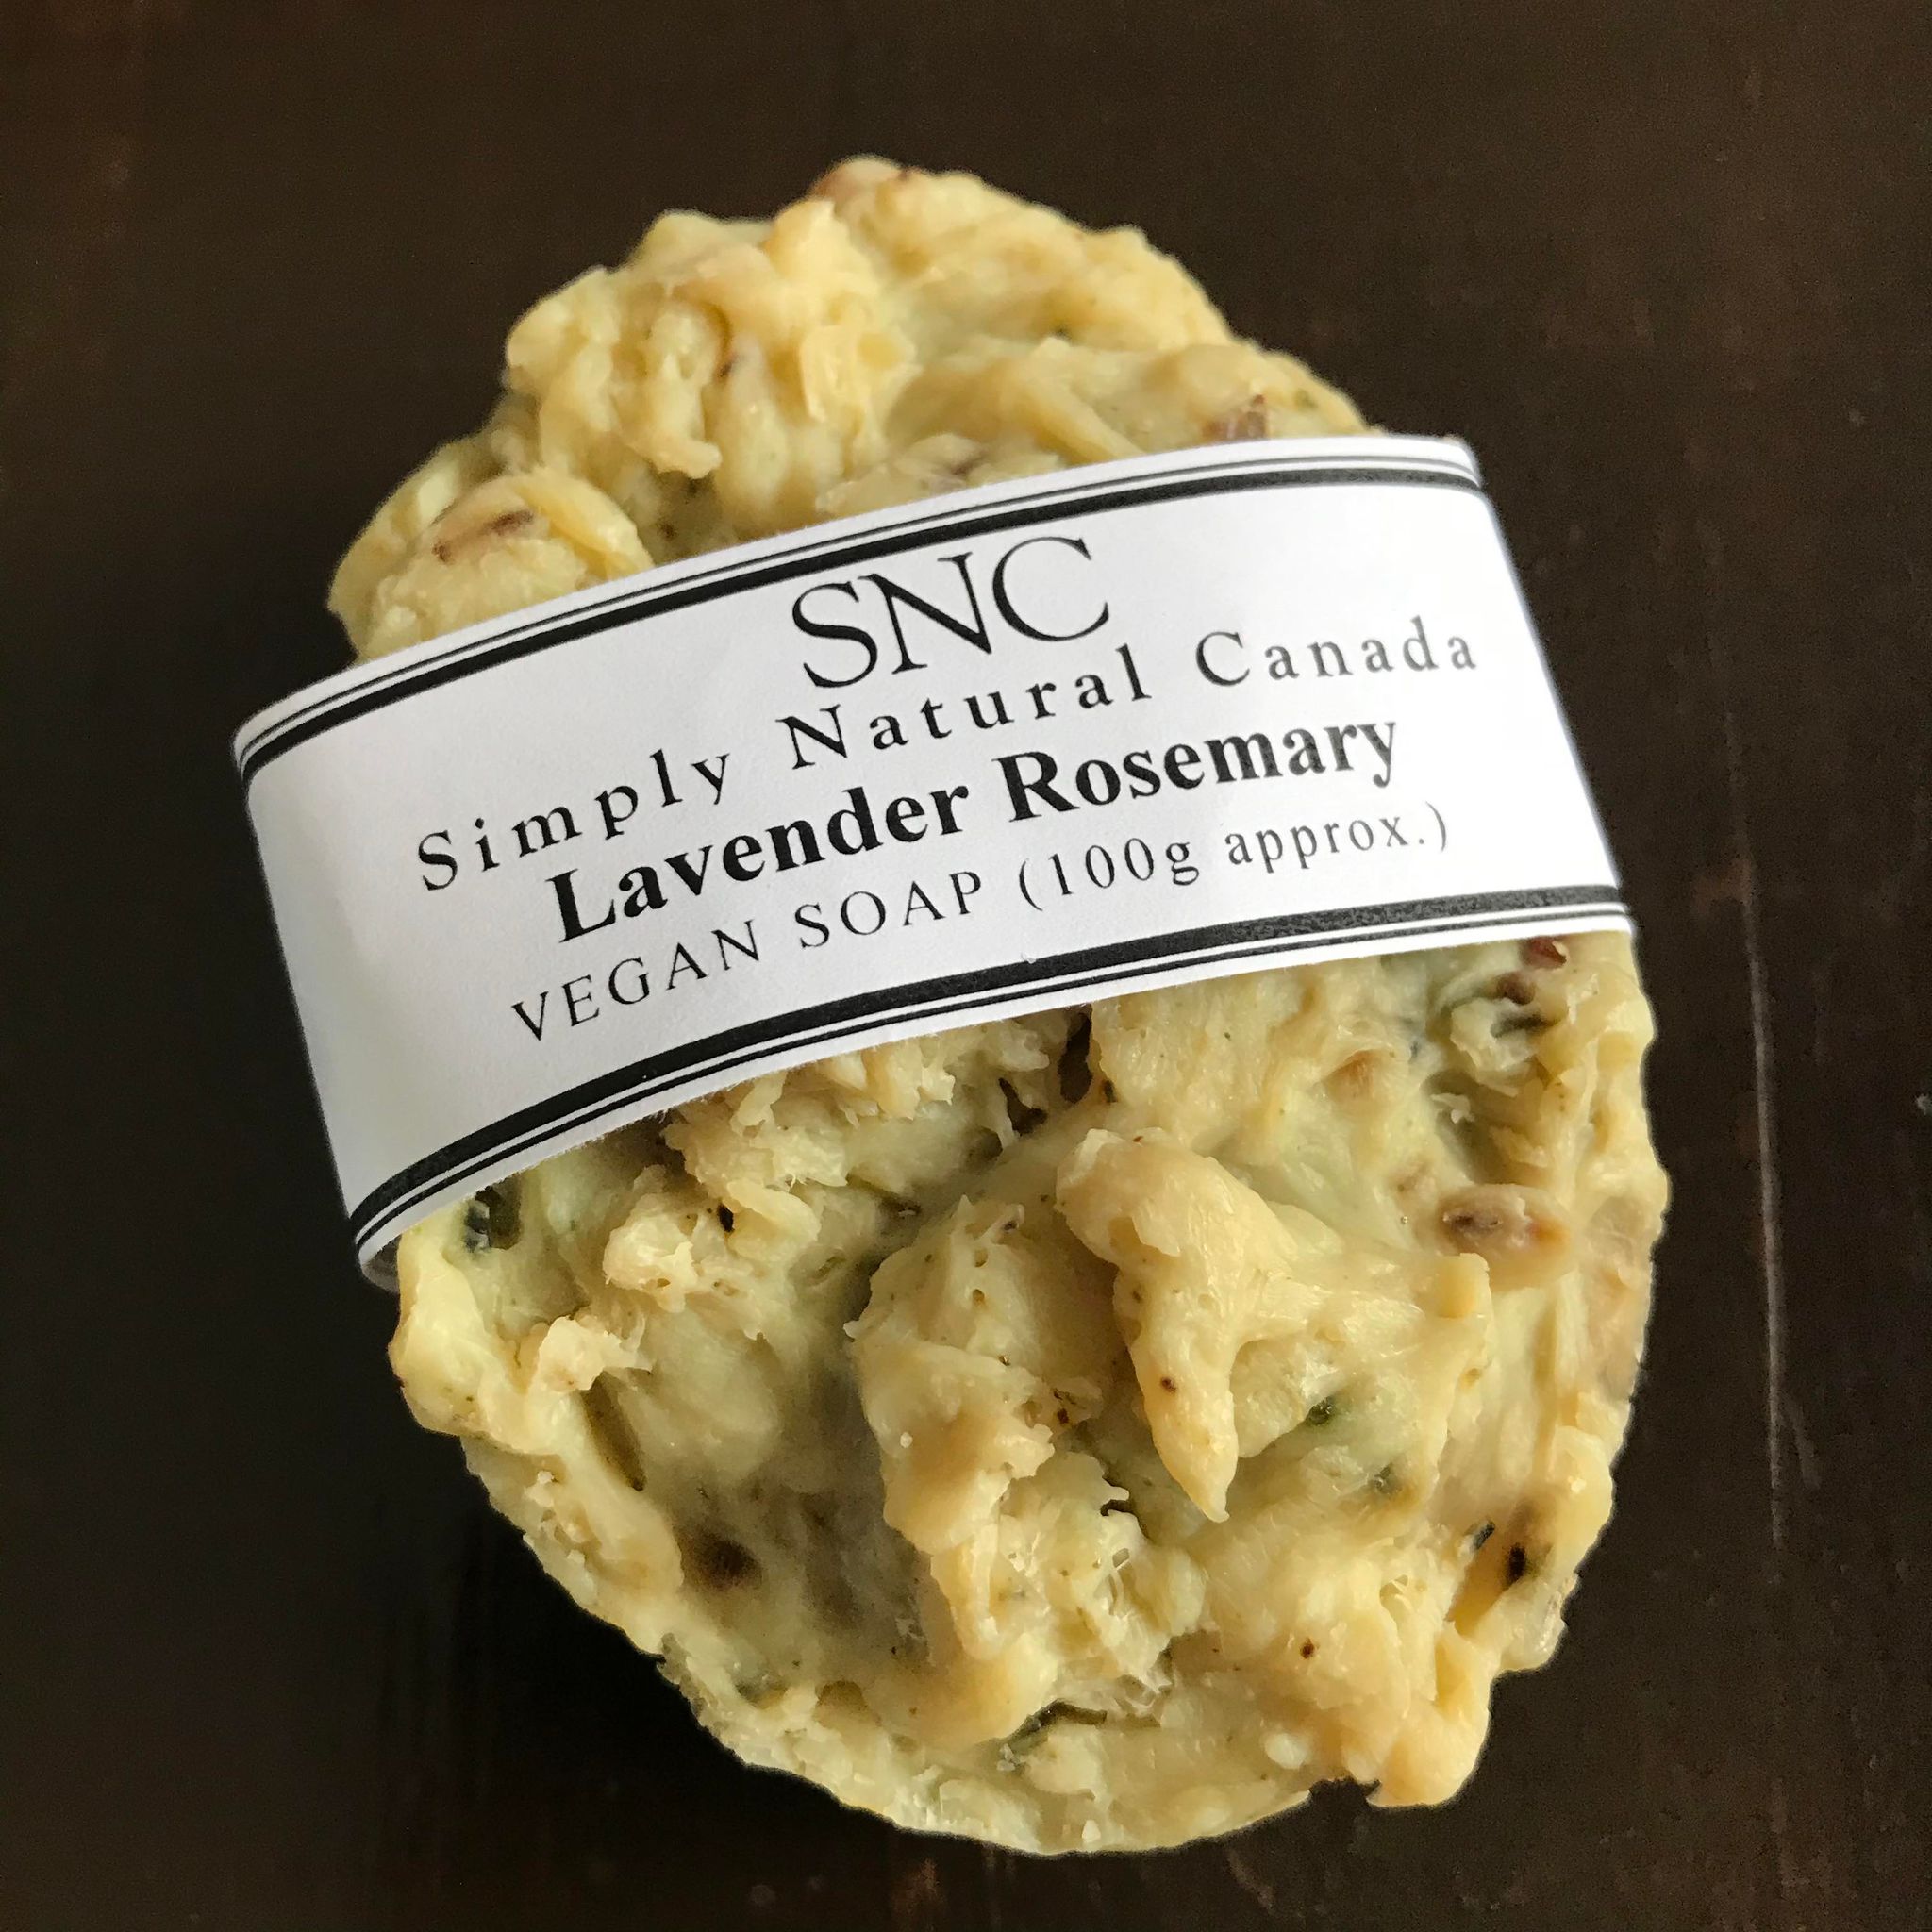 Lavender rosemary oval vegan soap made in Canada by Simply Natural Canada